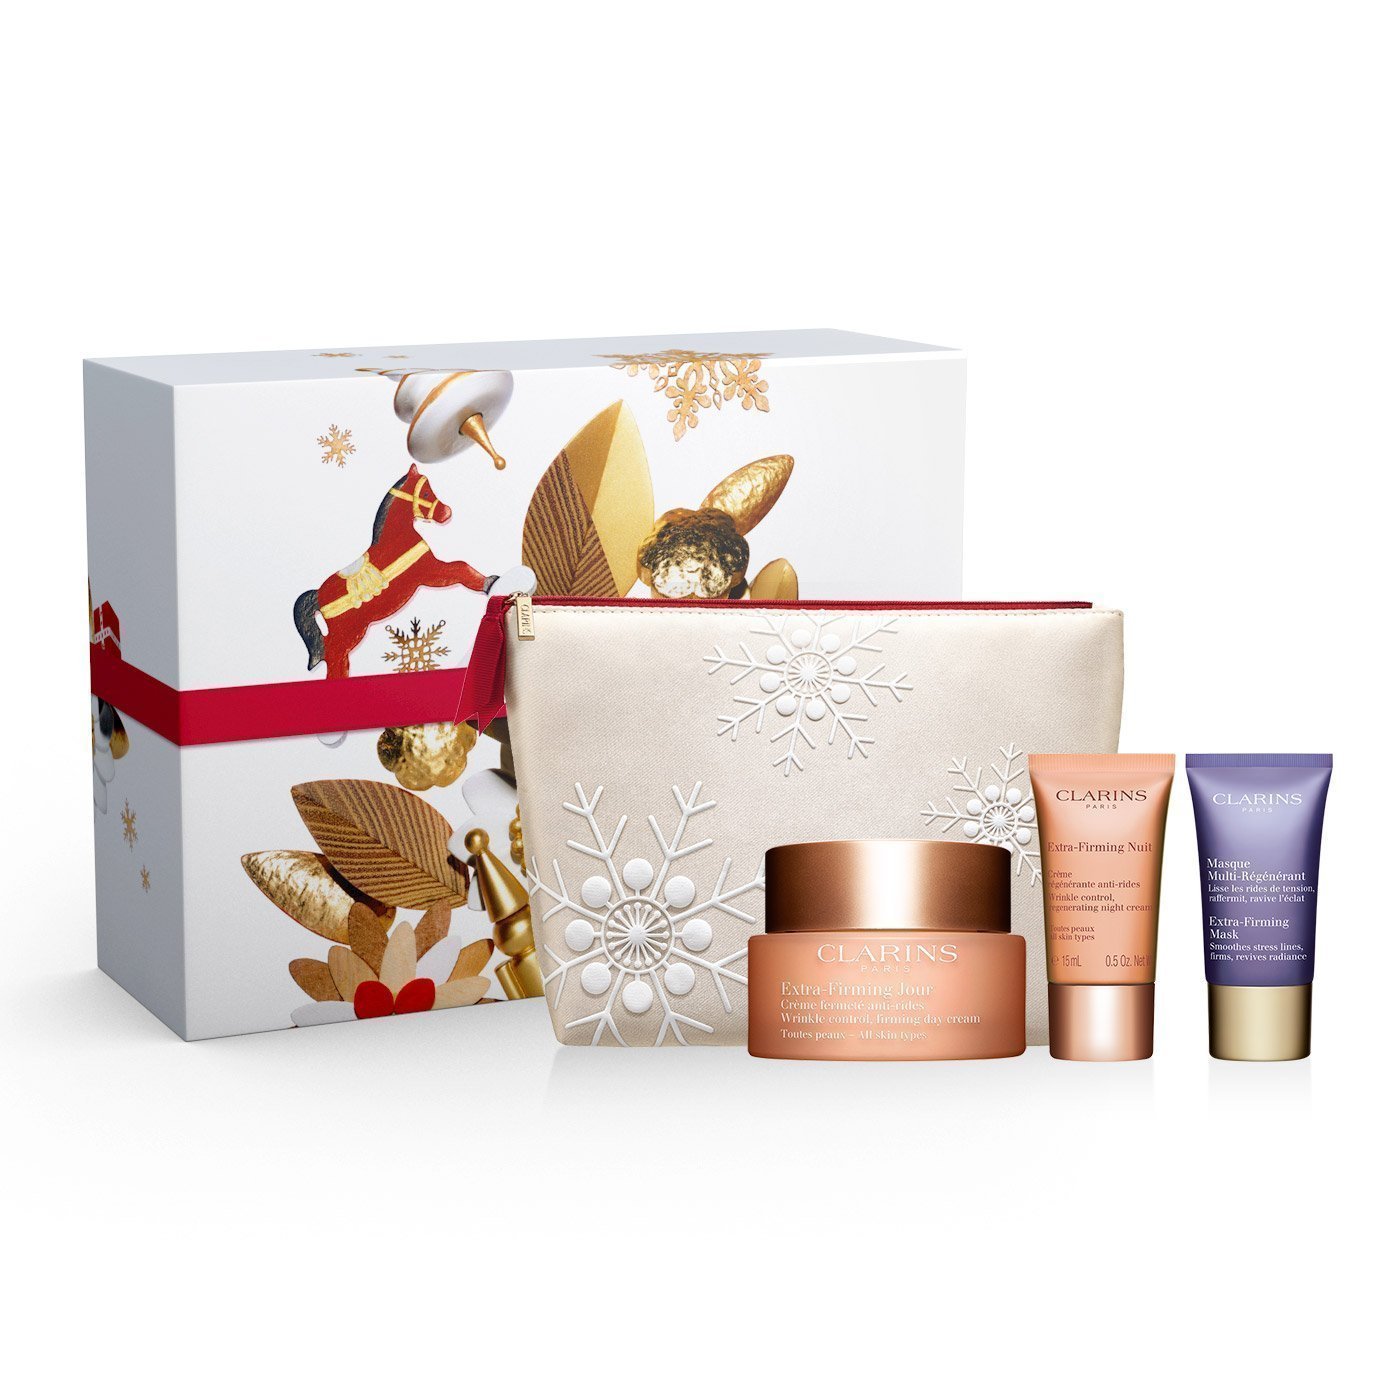 Clarins beauty gifts